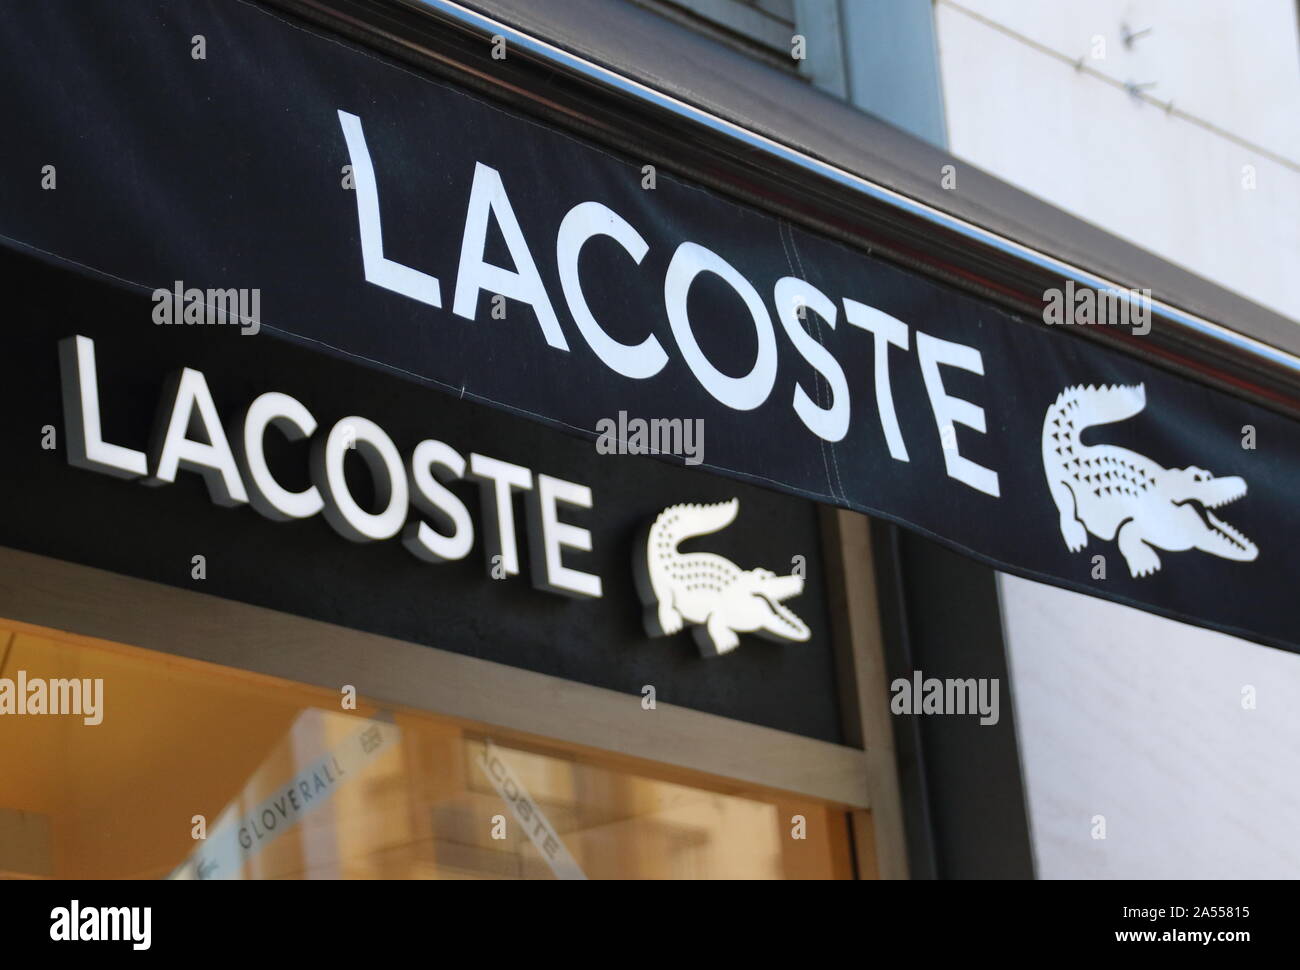 Lacoste Store High Resolution Stock Photography and Images - Alamy